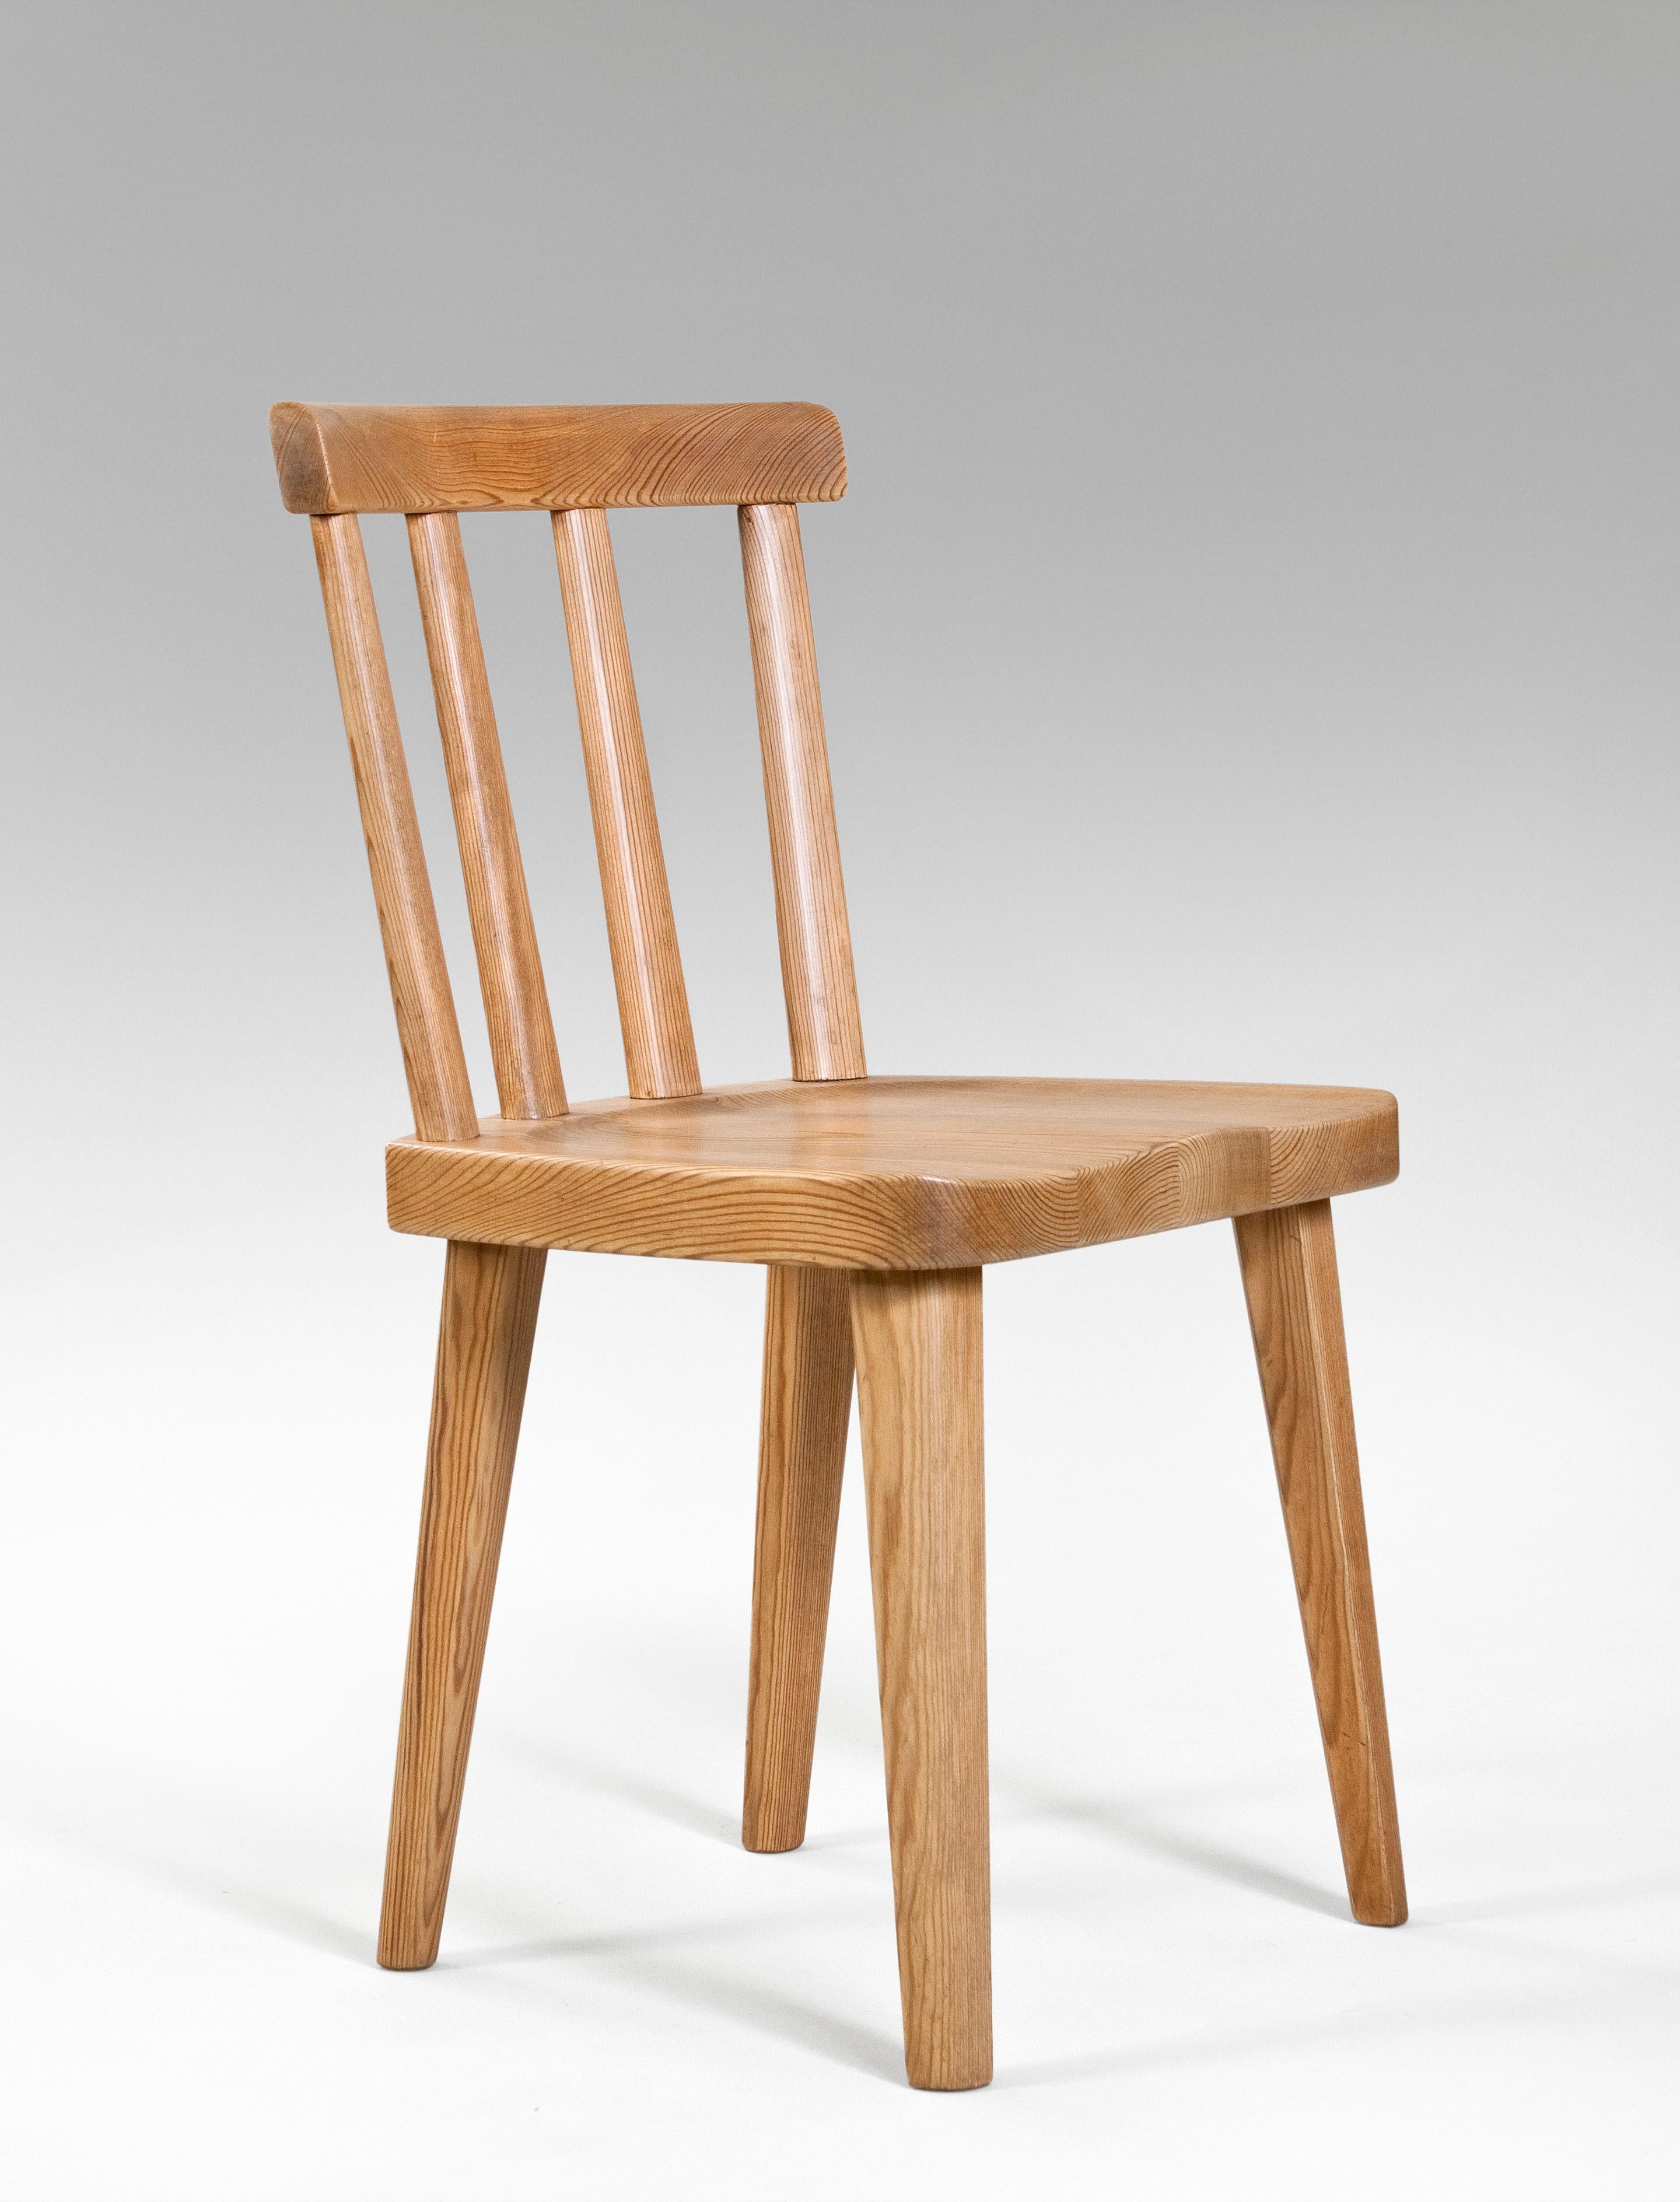 Axel Einar Hjorth, for Nordiska Kompaniet, 
Set of 6 Swedish Solid Pine Utö chairs
circa 1930
The concave top rail raised on four rounded back splats, above a contoured seat, terminating in tapering rounded legs. In great overall antique